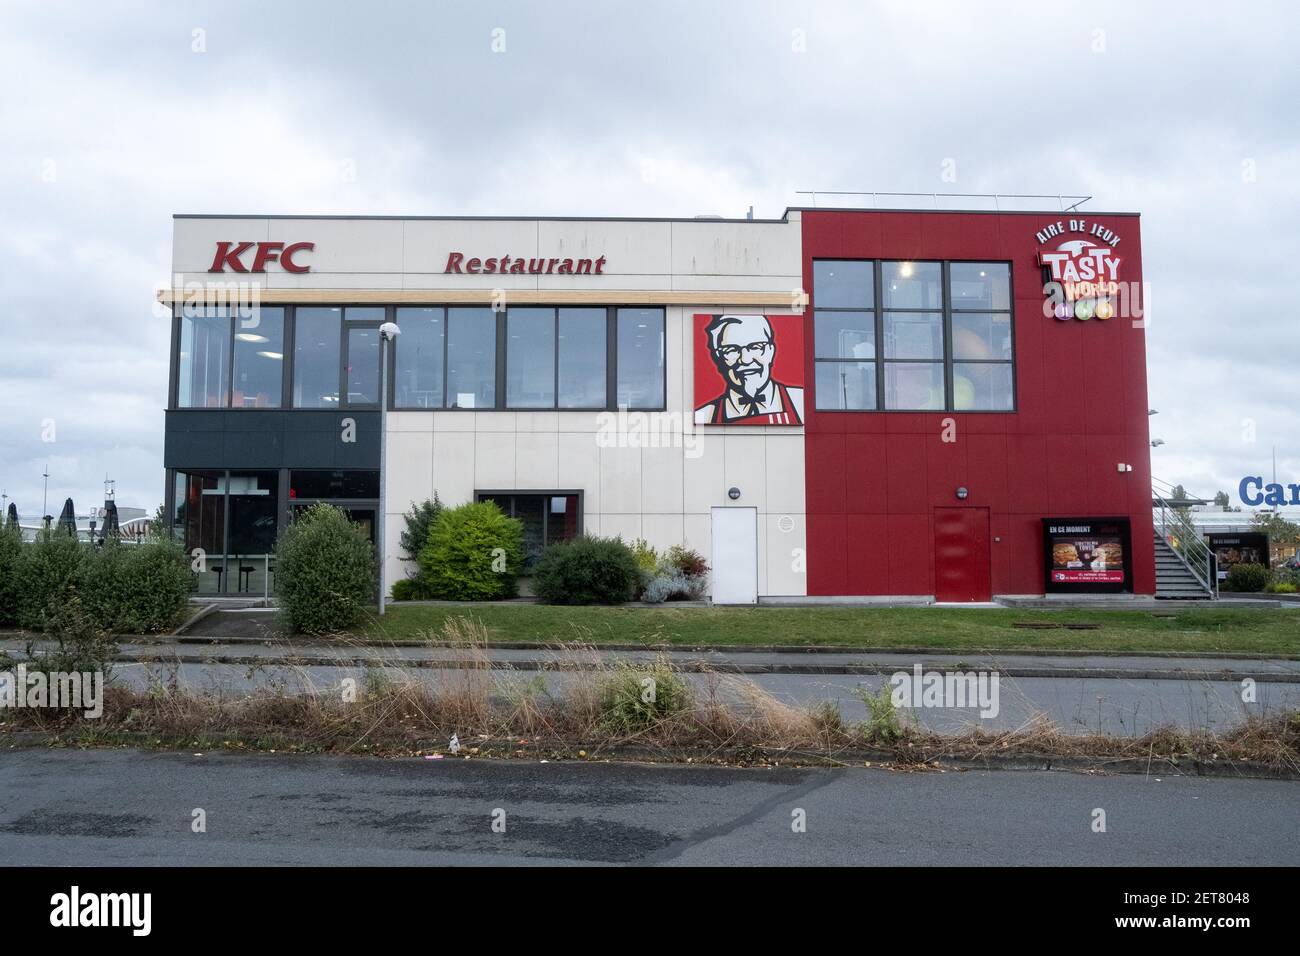 Page 8 - Kfc Shop High Resolution Stock Photography and Images - Alamy